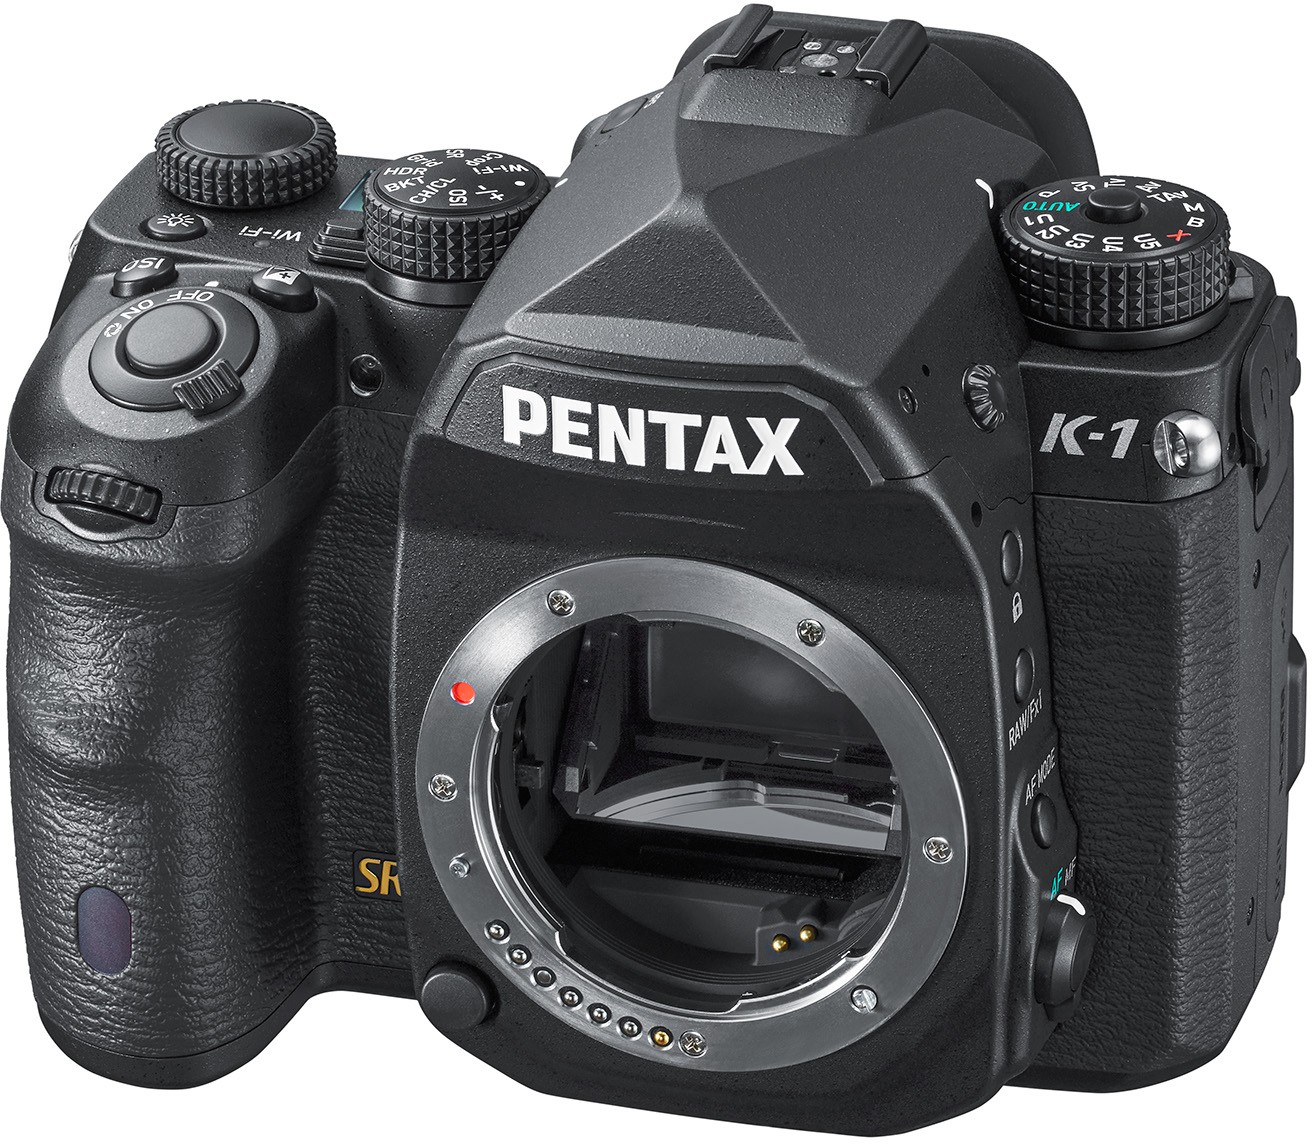 Ricoh Pentax K-1 Camera Benefits from a New Firmware - Version 1.30